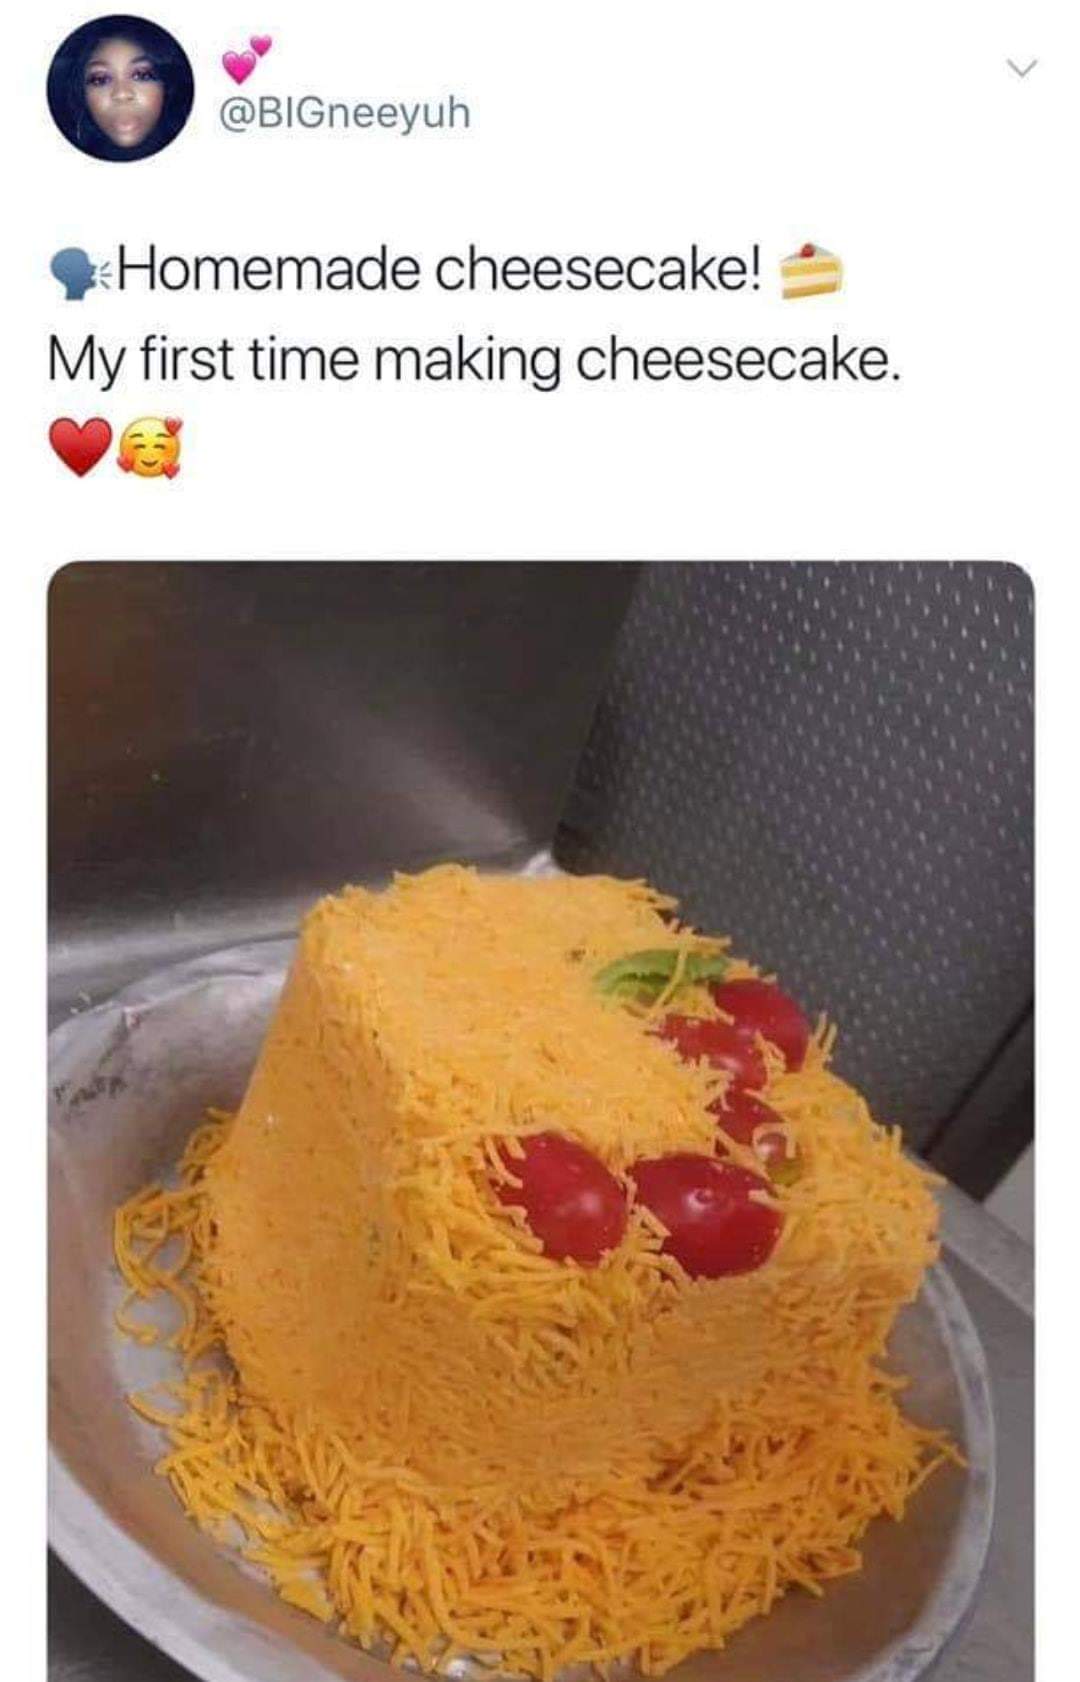 dank memes - funny memes - first time making cheesecake meme - Homemade cheesecake! My first time making cheesecake.